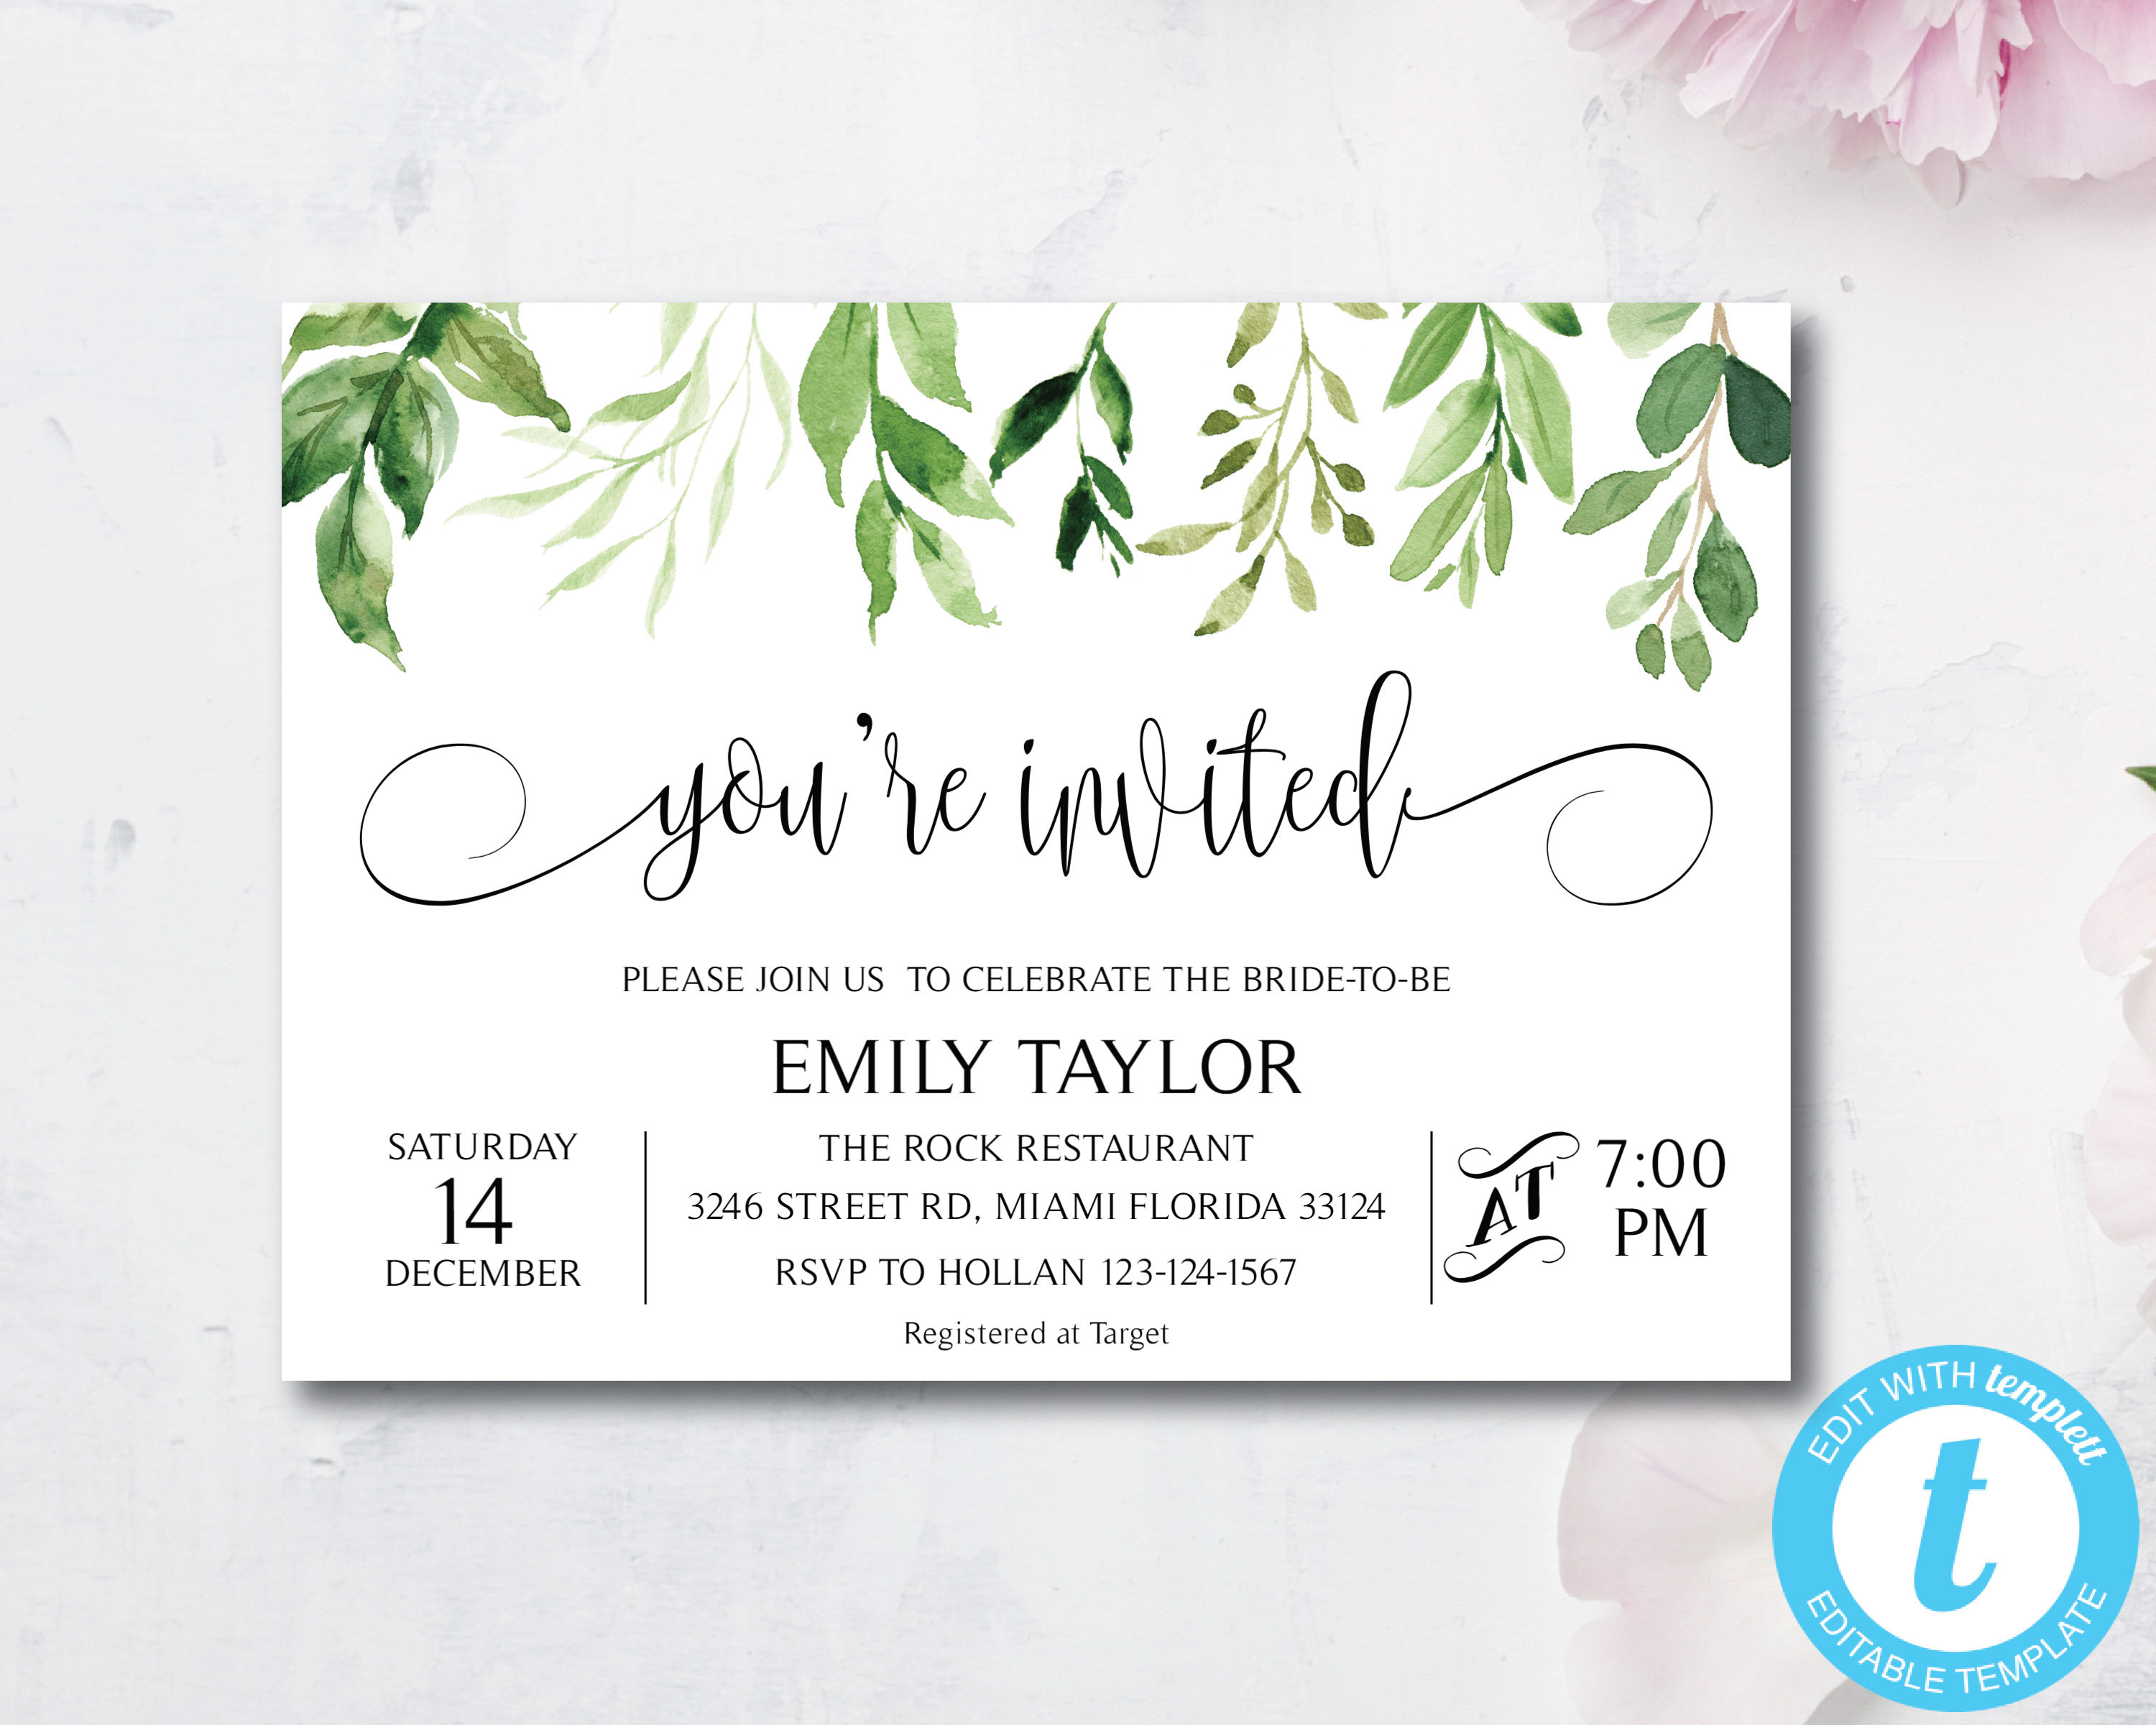 special-invitation-template-business-template-ideas